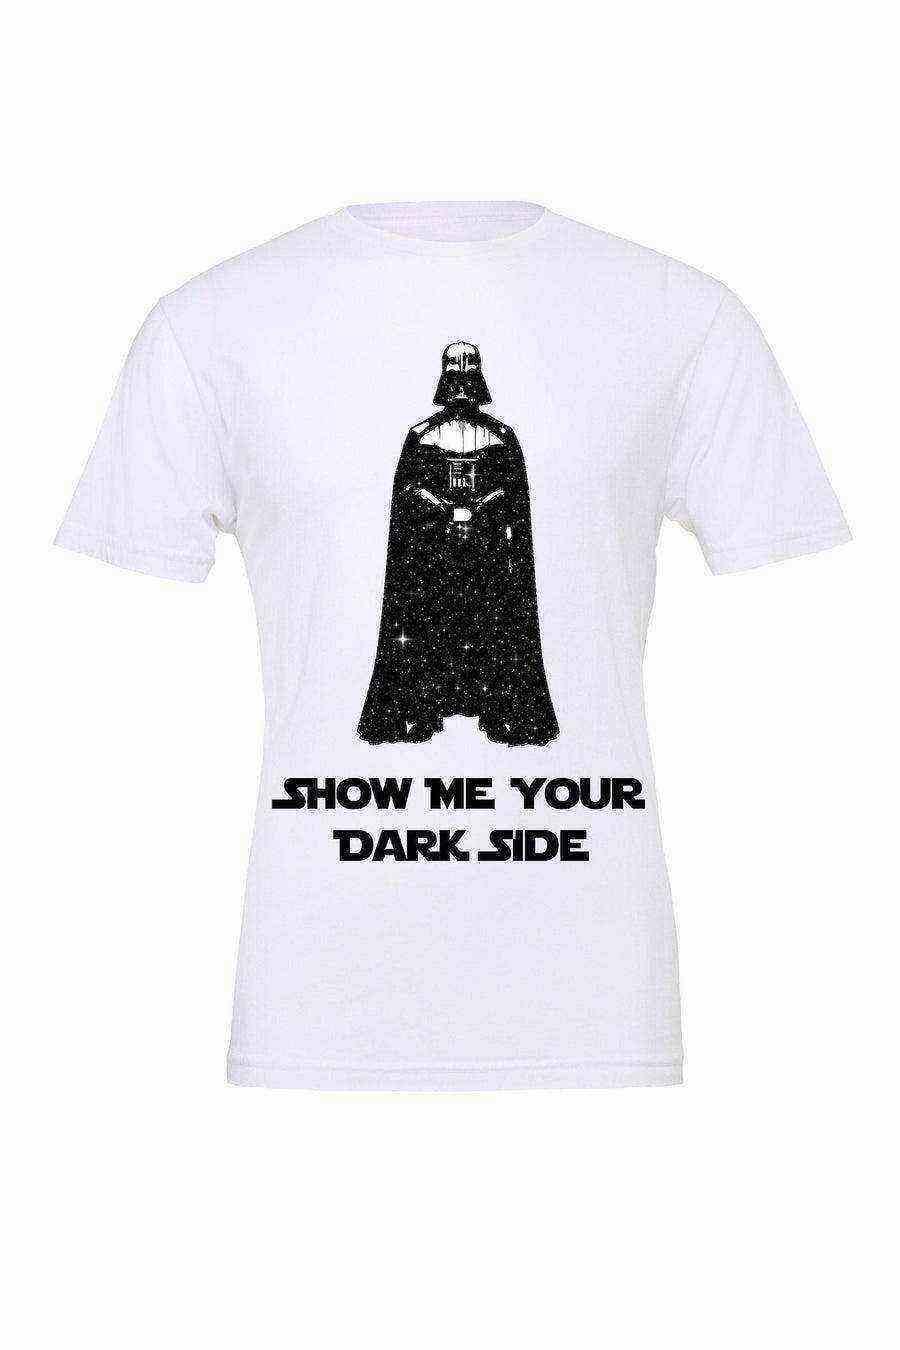 Youth | Darth Vader Shirt | Show Me Your Dark Side - Dylan's Tees